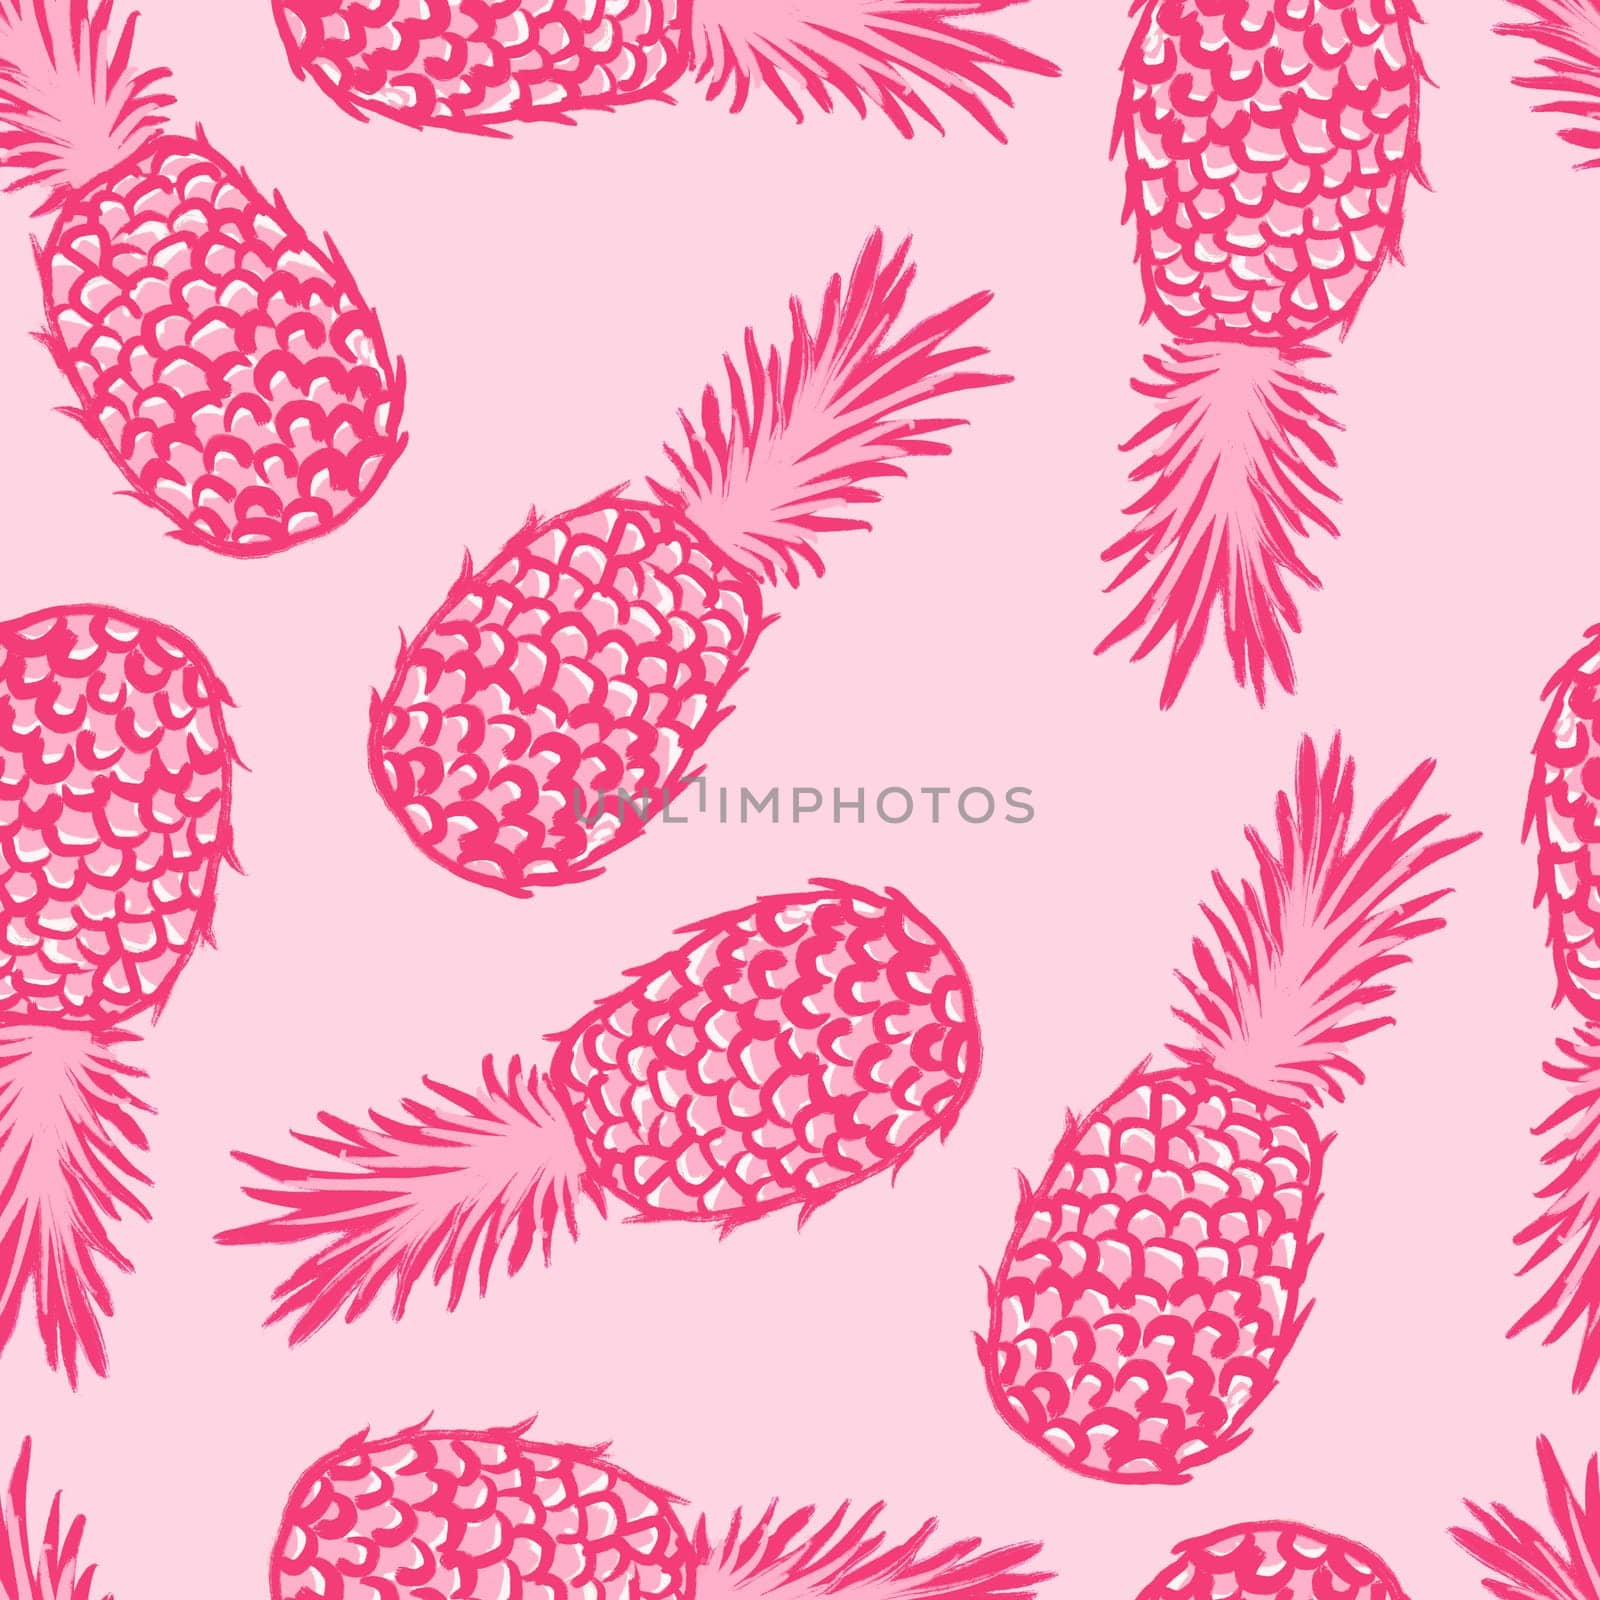 Hand drawn seamless pattern illustration of fruit pineapple, pink tropical dessert food, bright colorful sketch style. Eating vegetarian summer diet, tasty delicious groceries organic nature design.trendy sketch doodle. by Lagmar